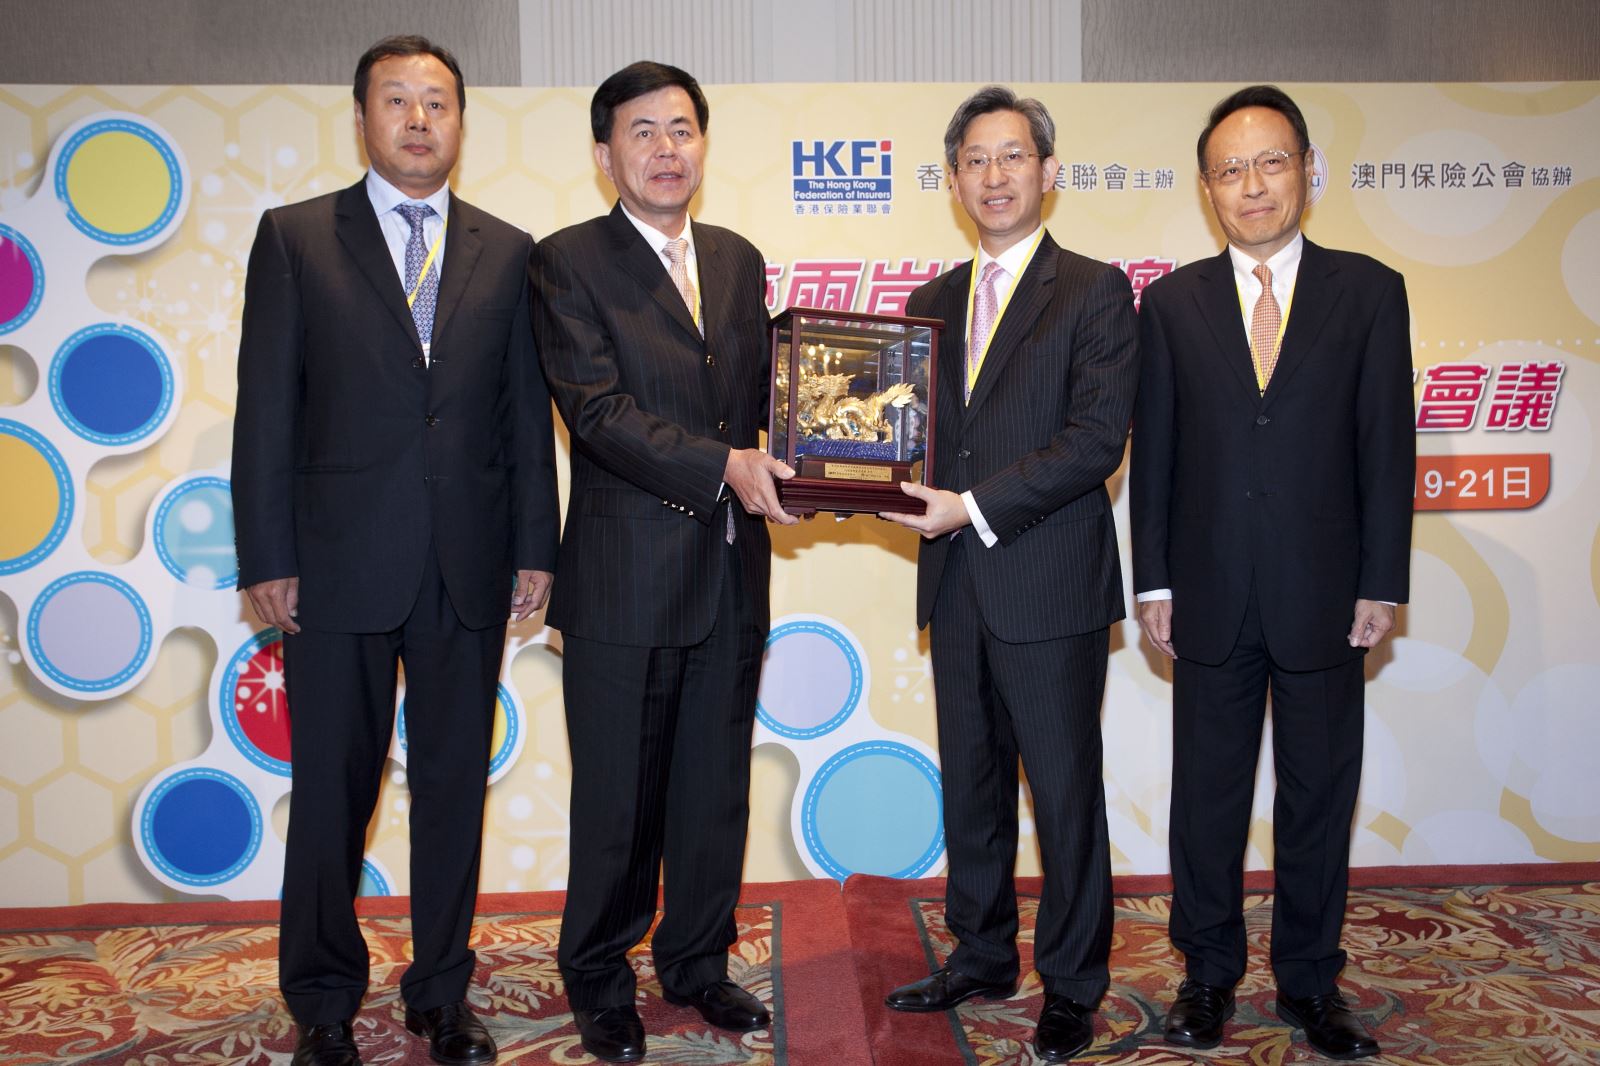 18th Cross-strait, Hong Kong & Macau Insurance Business Conference - Opening Ceremony & Plenary Session